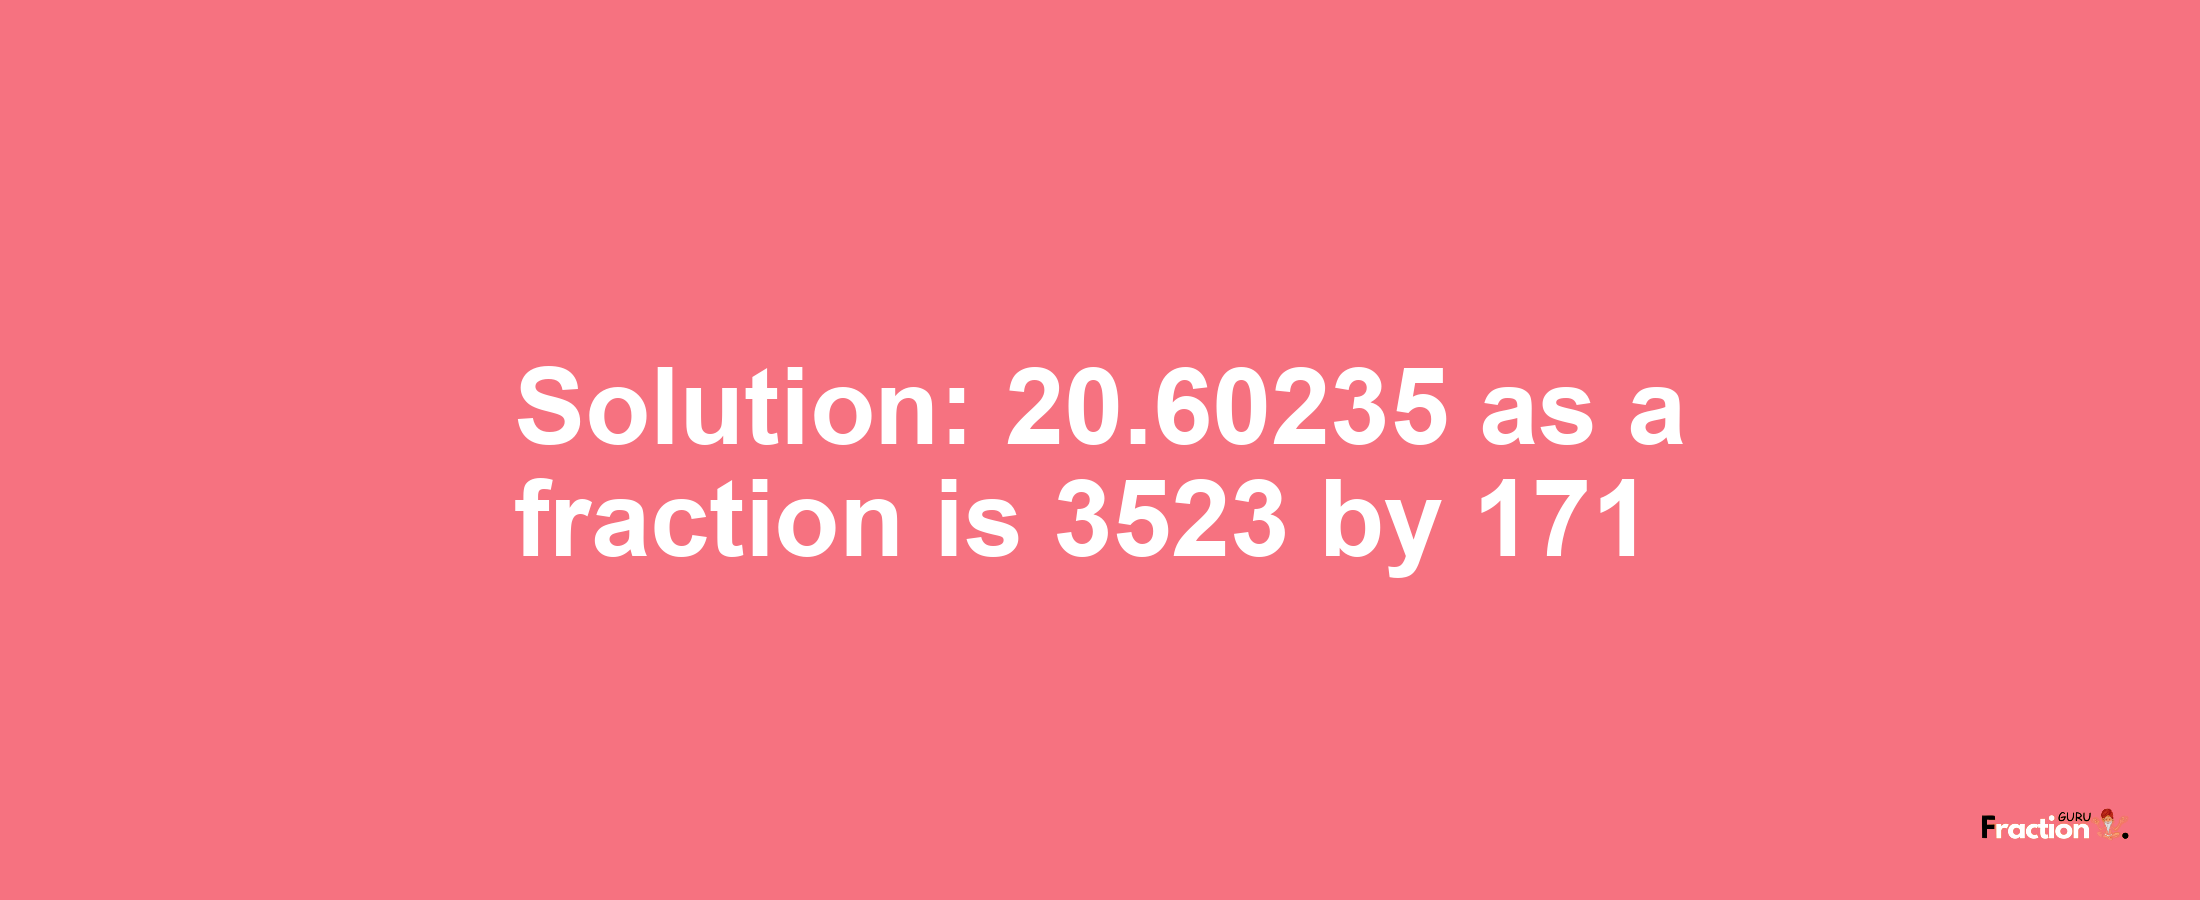 Solution:20.60235 as a fraction is 3523/171